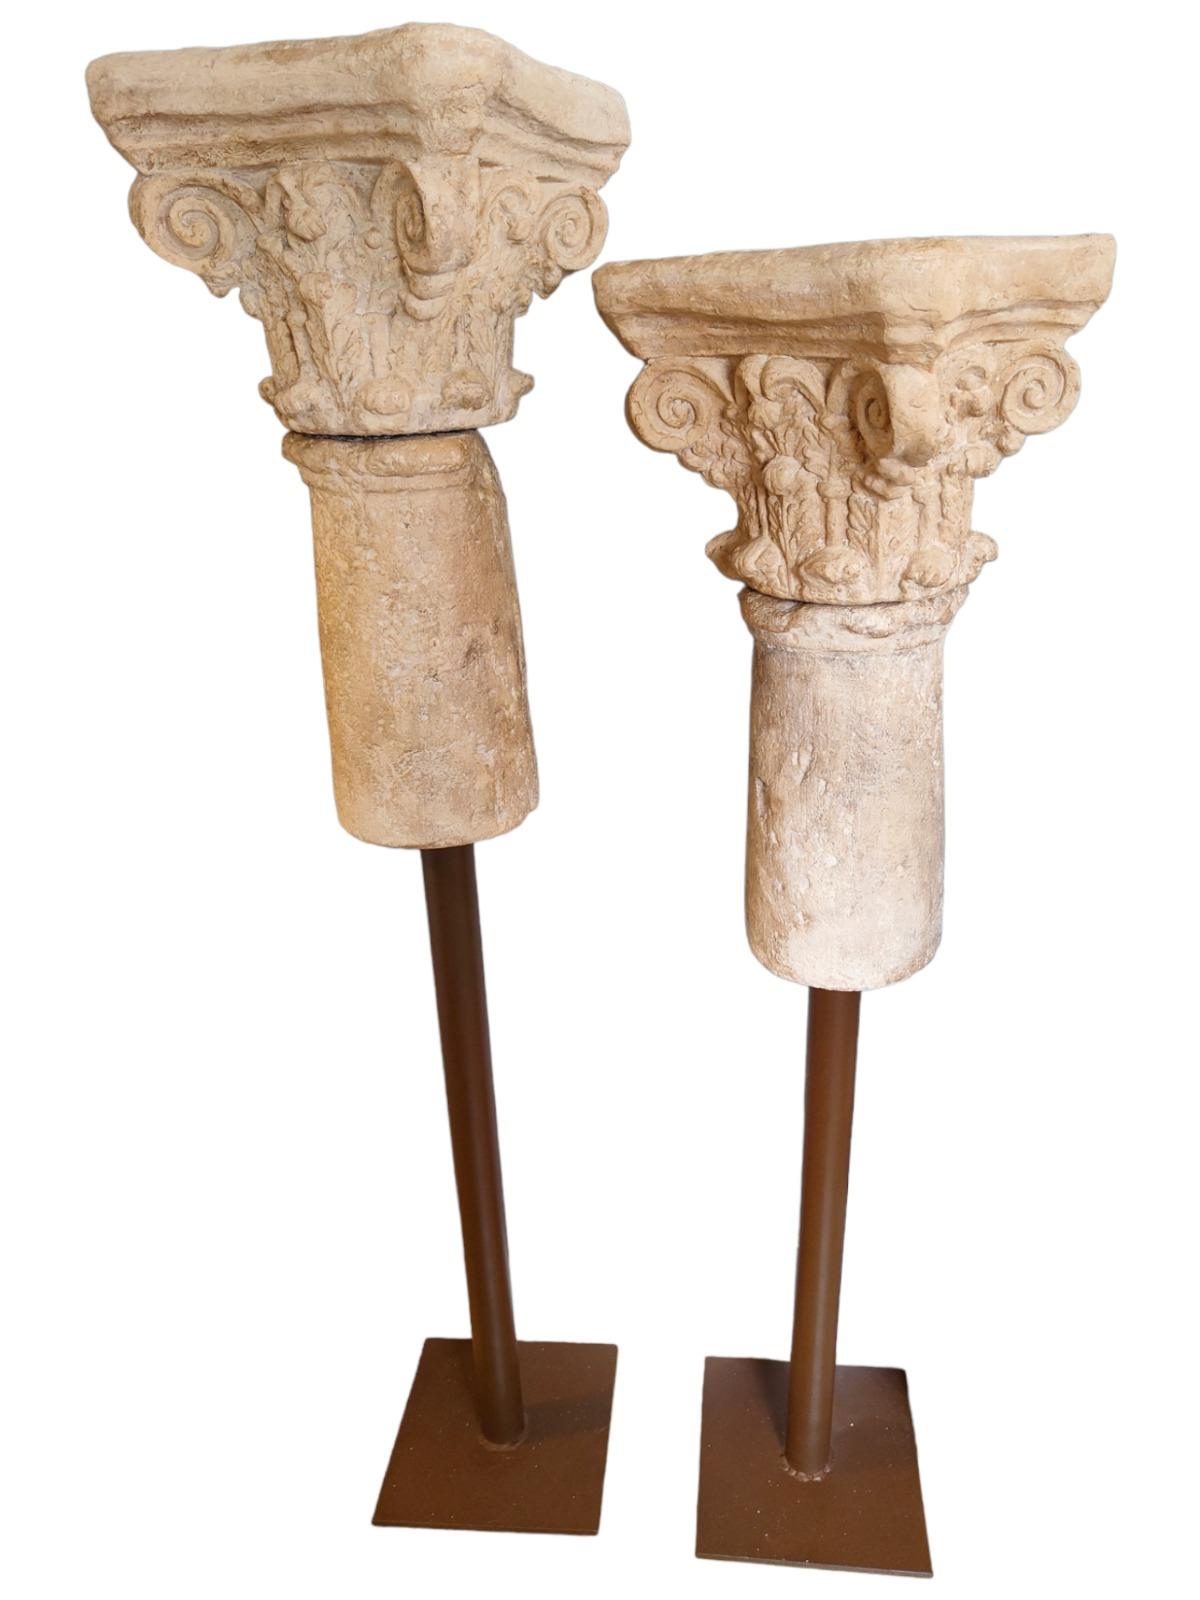 Hand-Crafted Pair of Terracotta or Similar Columns from the 20th Century For Sale